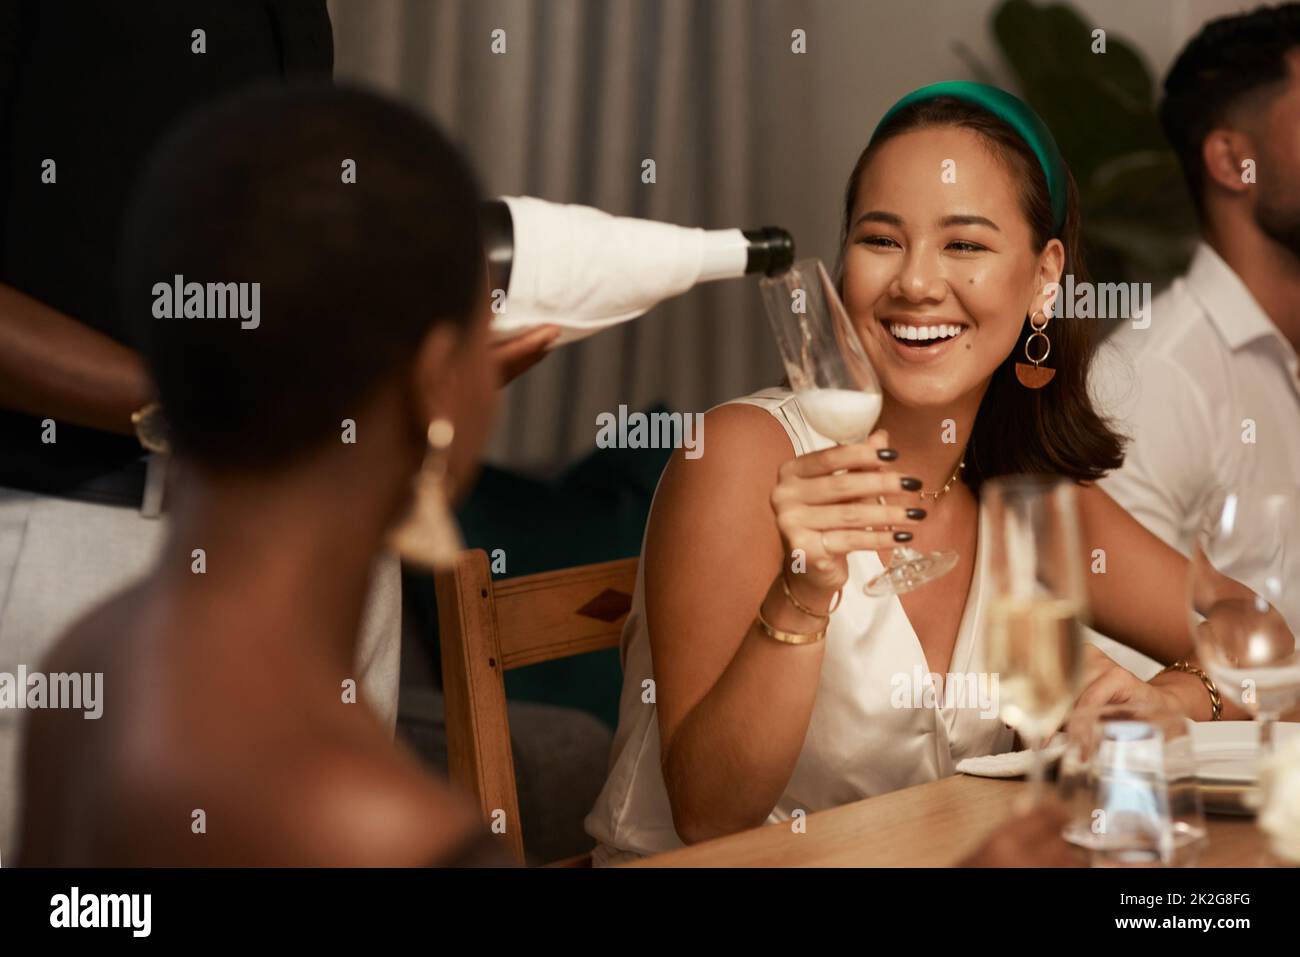 I cant pass up on more champagne. Shot of an unrecognizable man standing and pouring champagne into a glass for a friend during a dinner party. Stock Photo